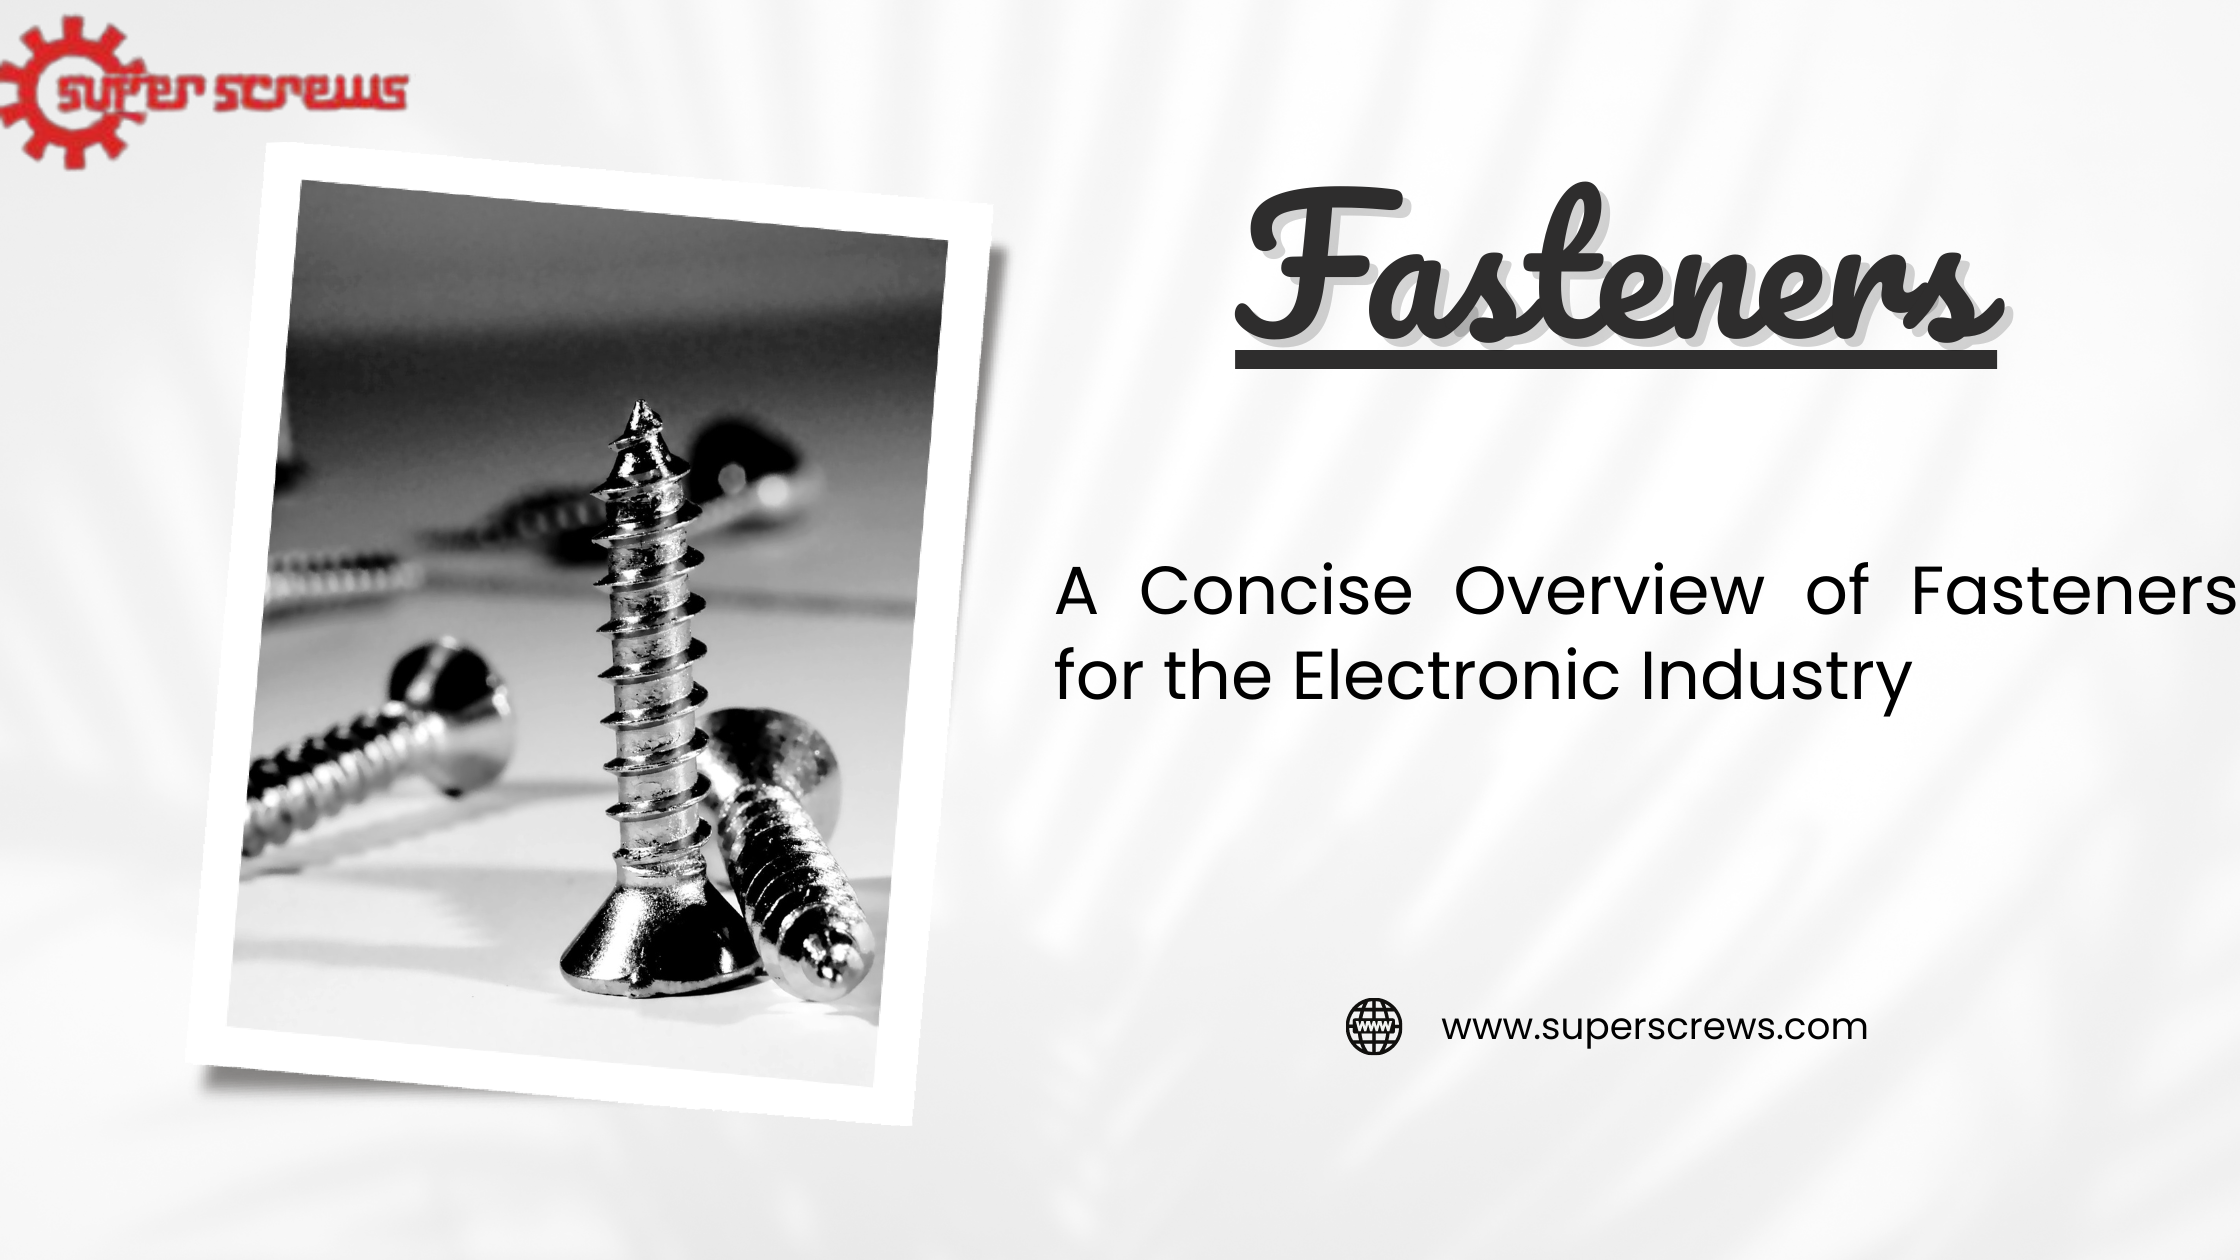 A Concise Overview of Fasteners for the Electronic Industry